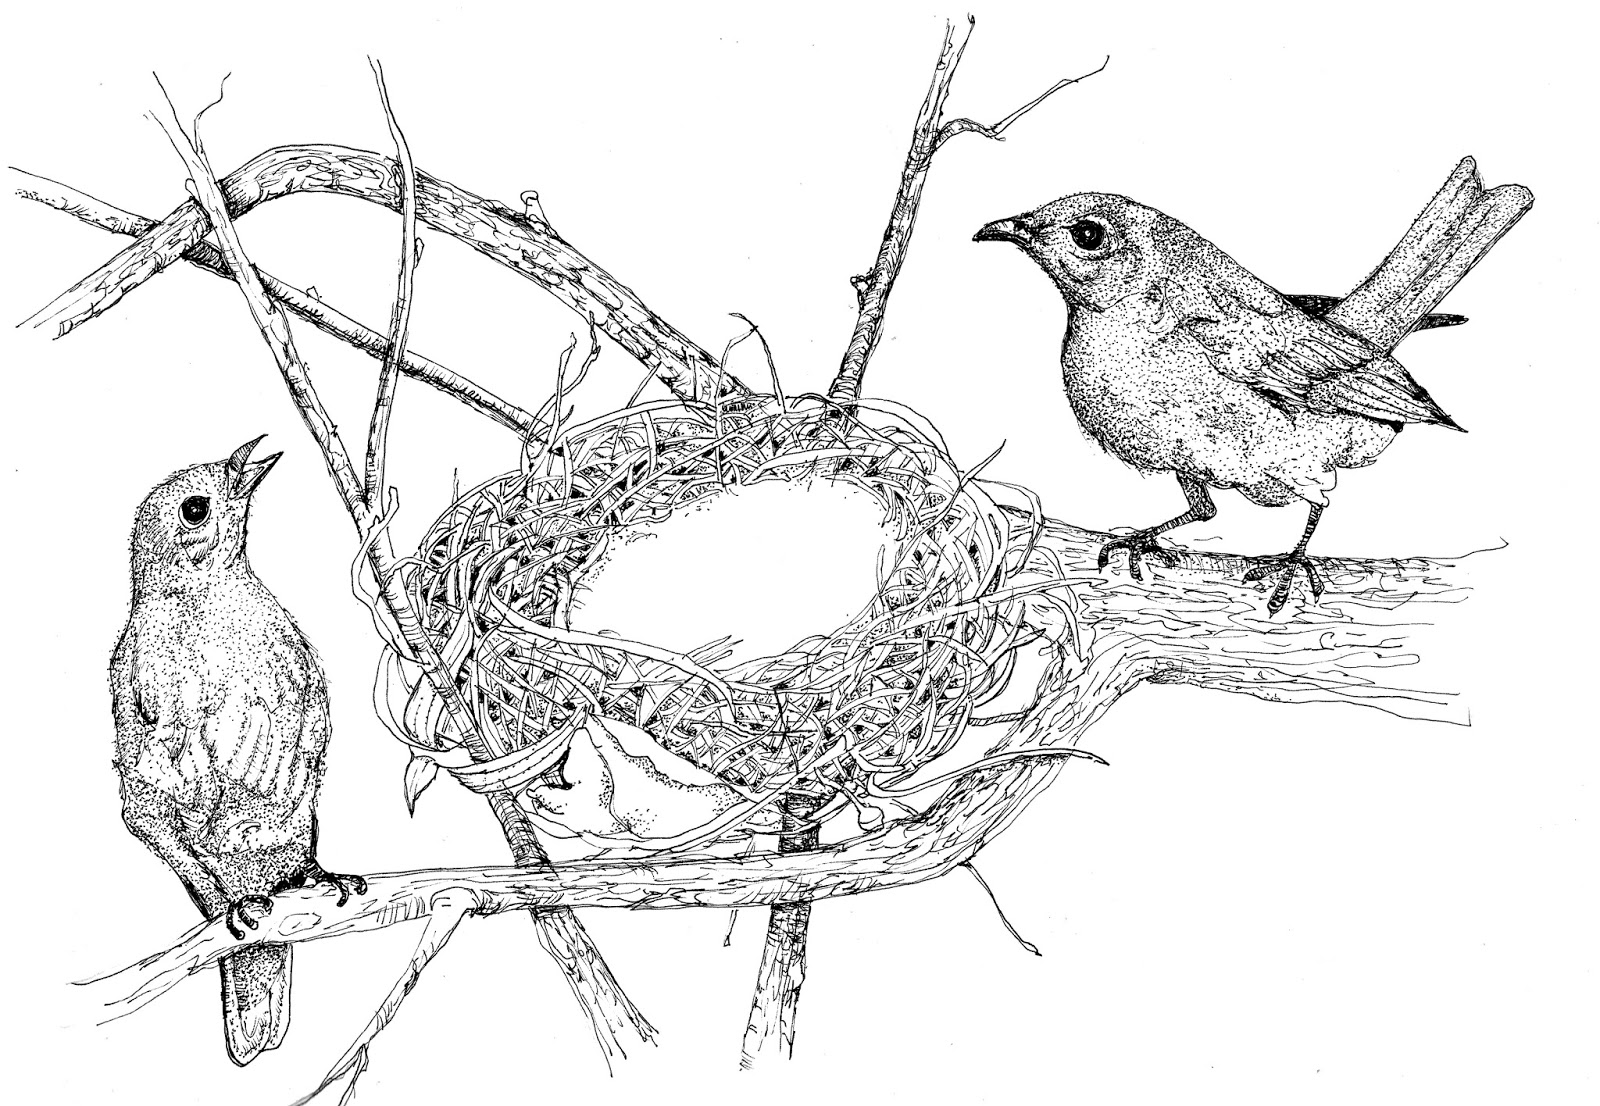 Robin Bird Drawing Easy Step by Step Guide - PRB ARTS